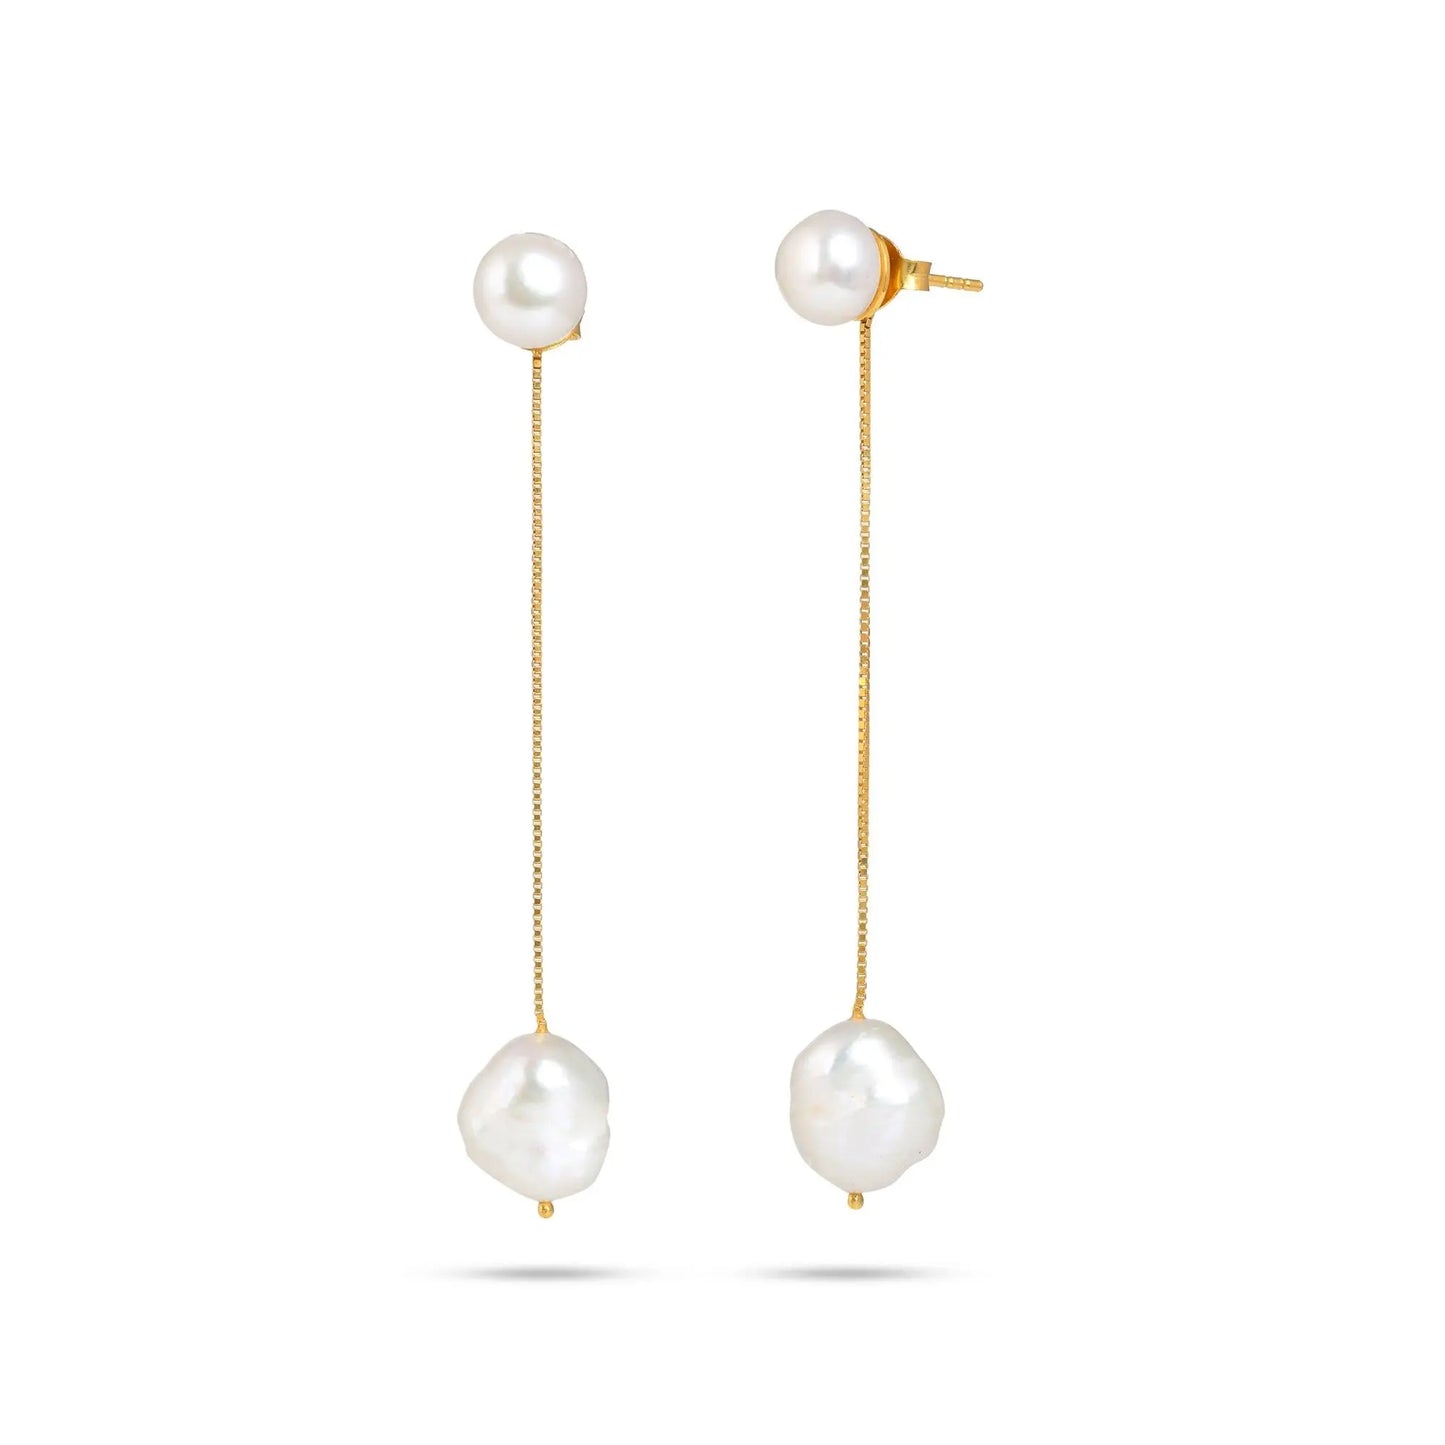 Silver Chain Drop Natural Pearl Earrings -From Purl Purl